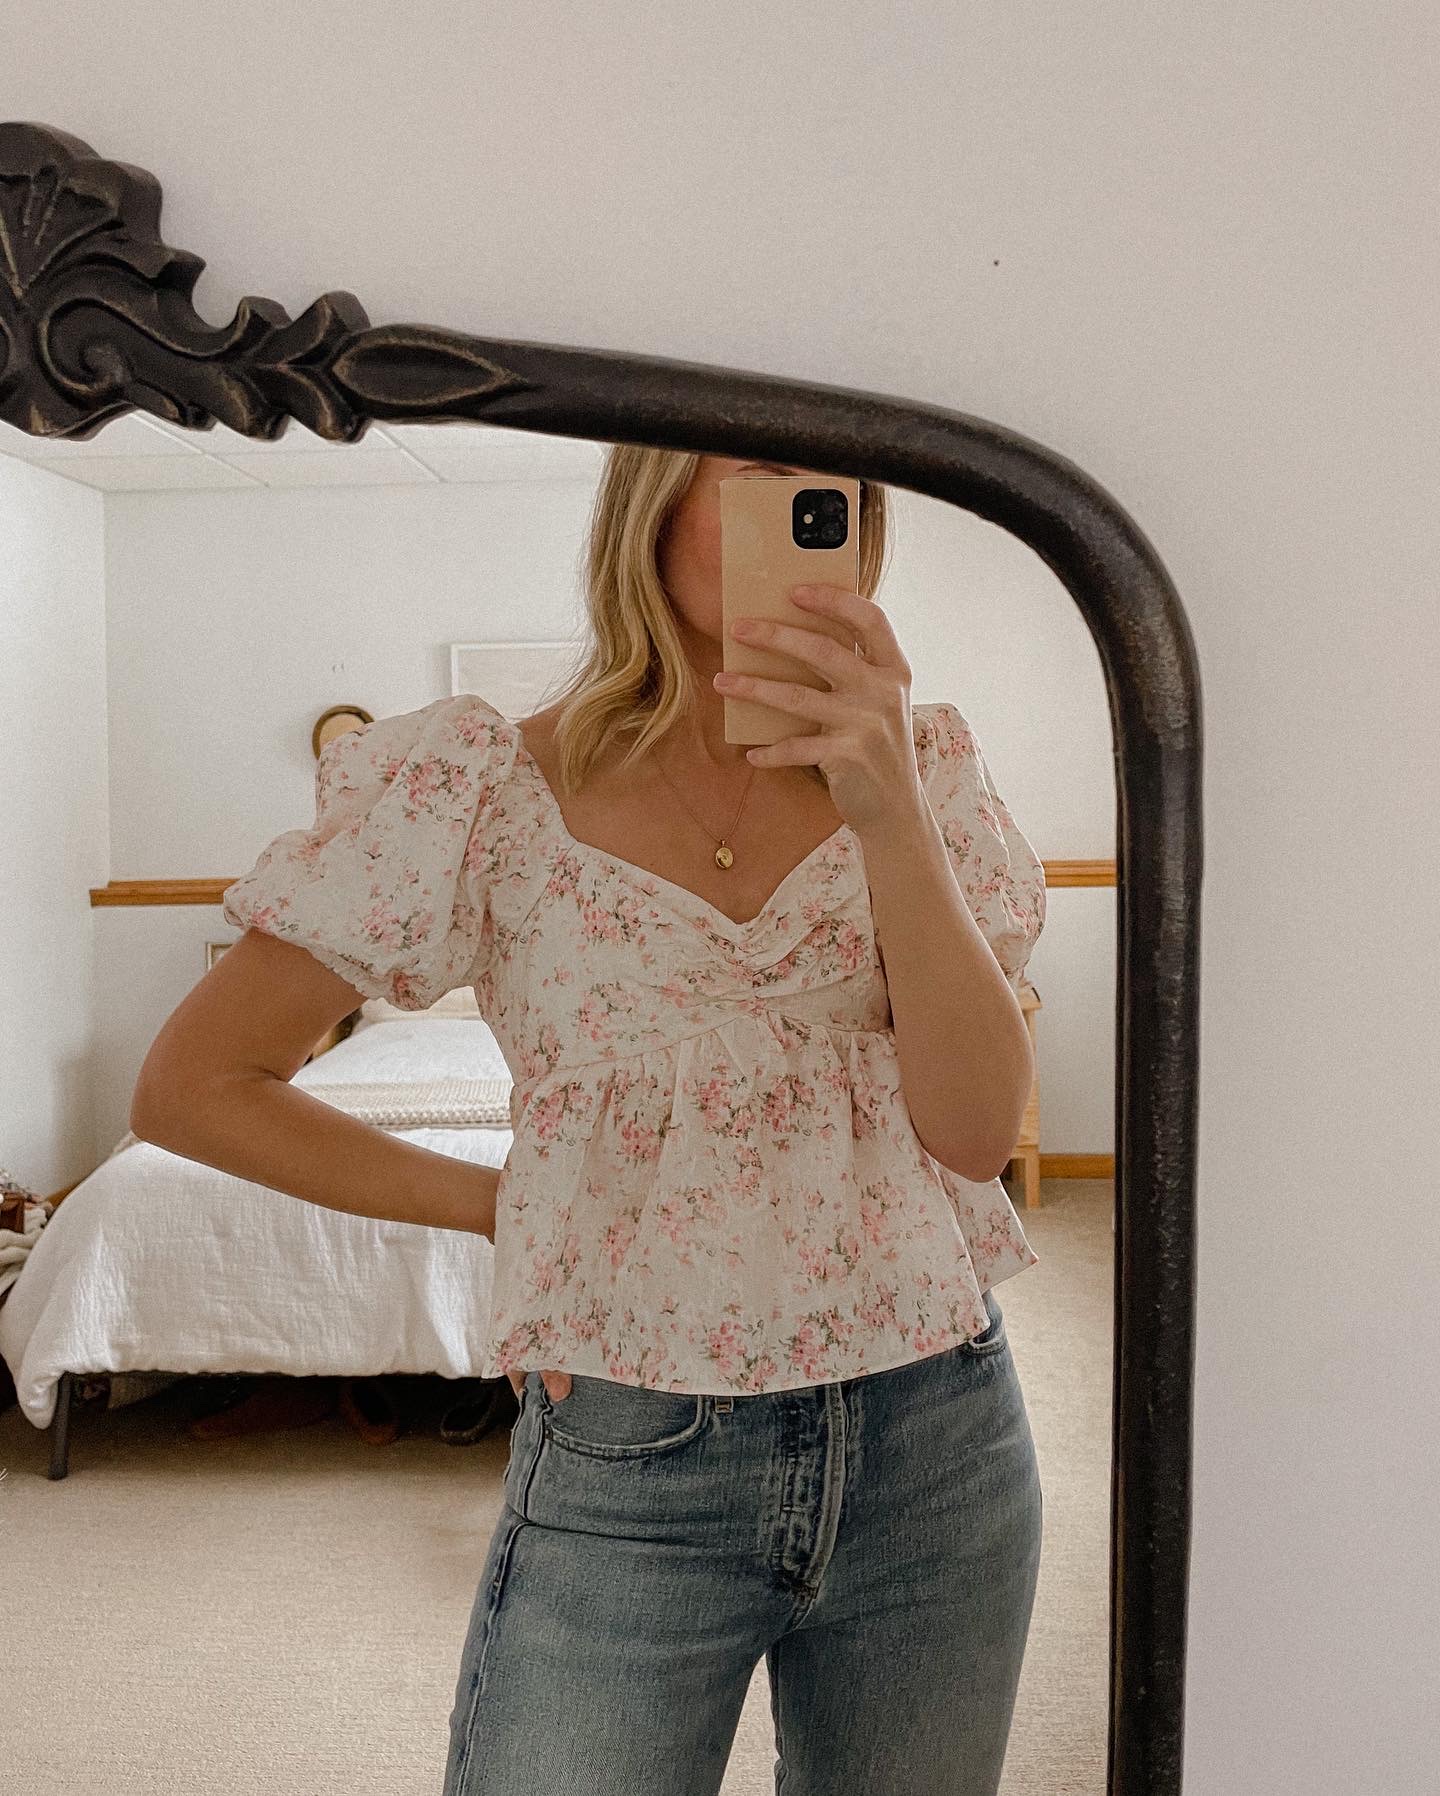 Karin Emily wears a floral sweetheart neckline top from the Shopbop Style Event